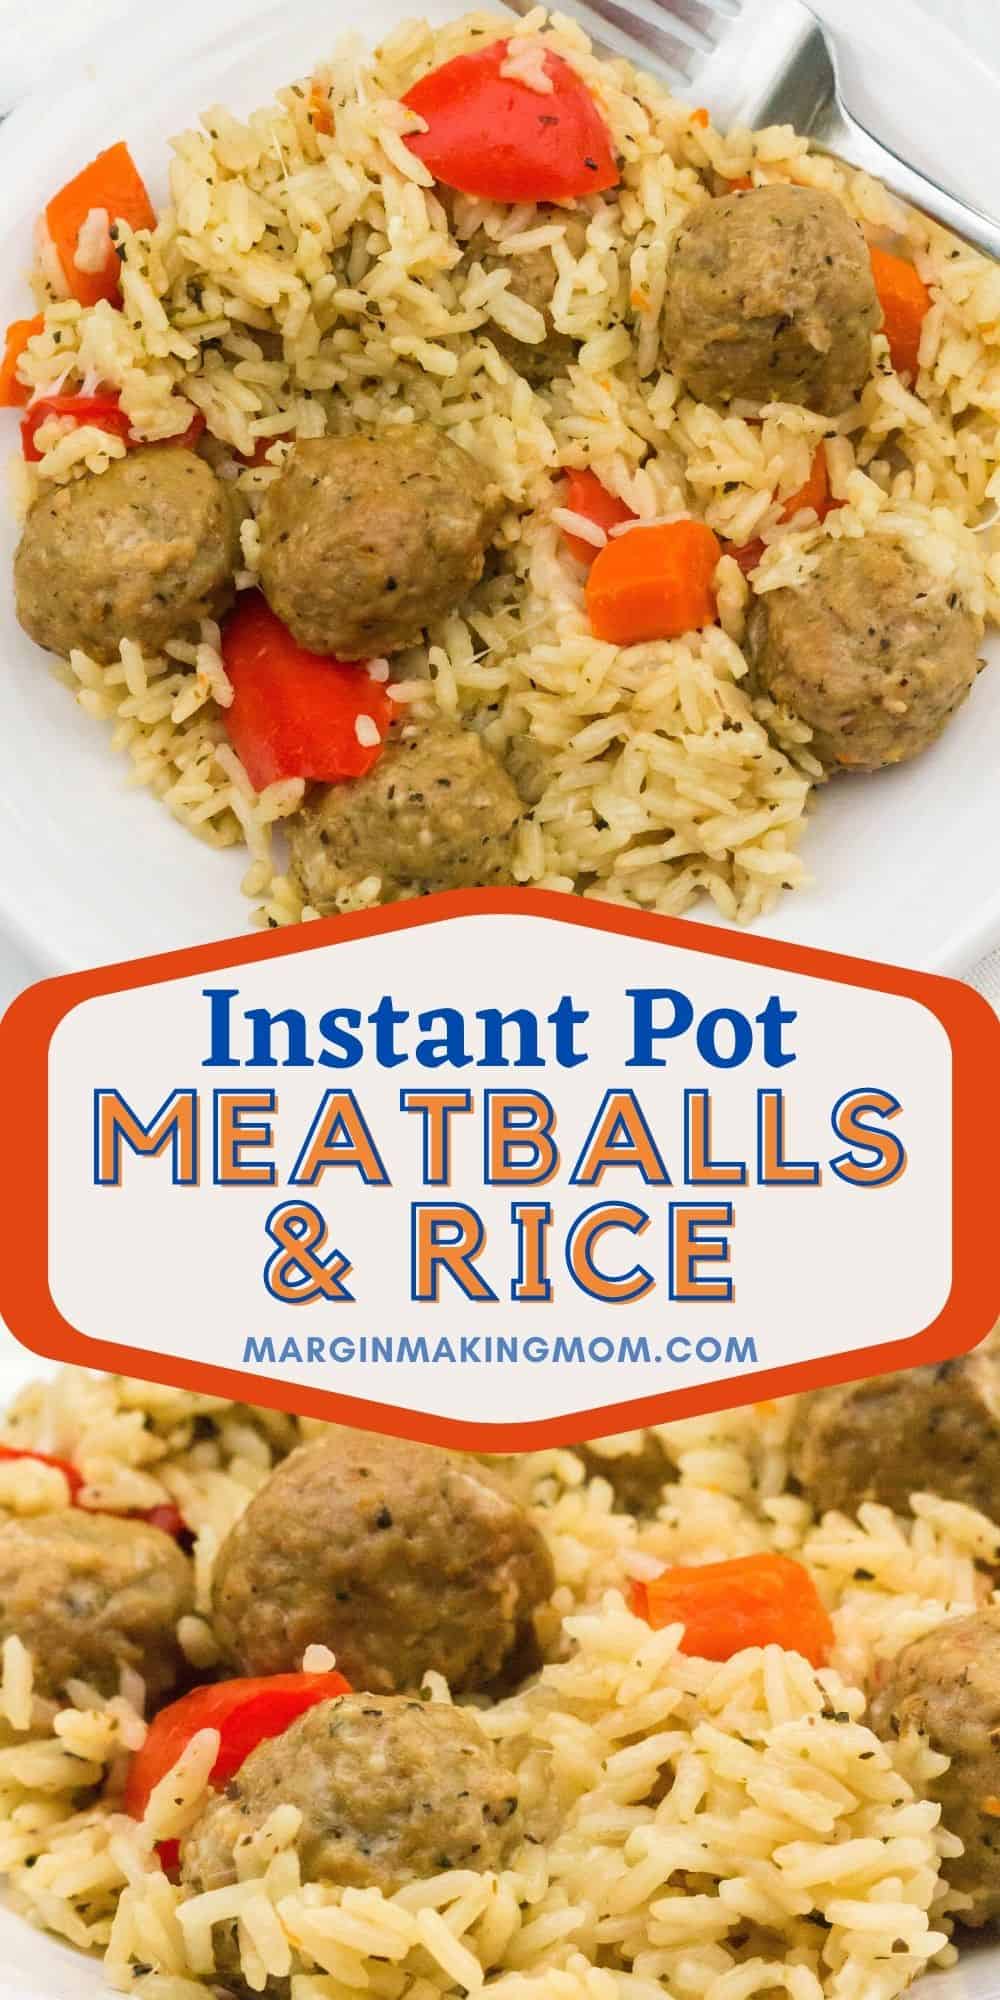 collage image featuring two photos of Instant Pot meatballs and rice, one taken from above and one taken from the side